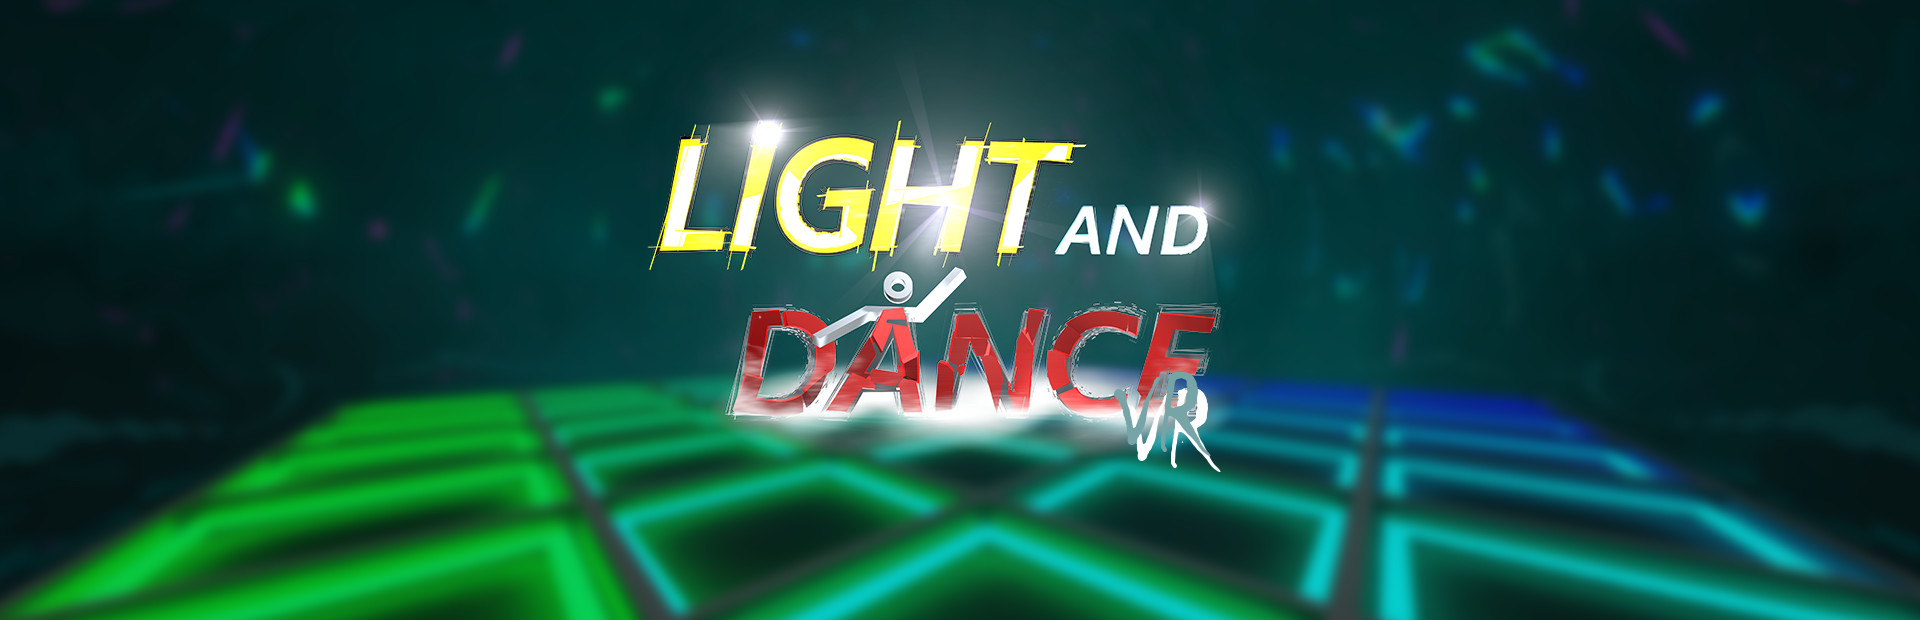 Light and Dance VR - Music, Action, Relaxation cover image